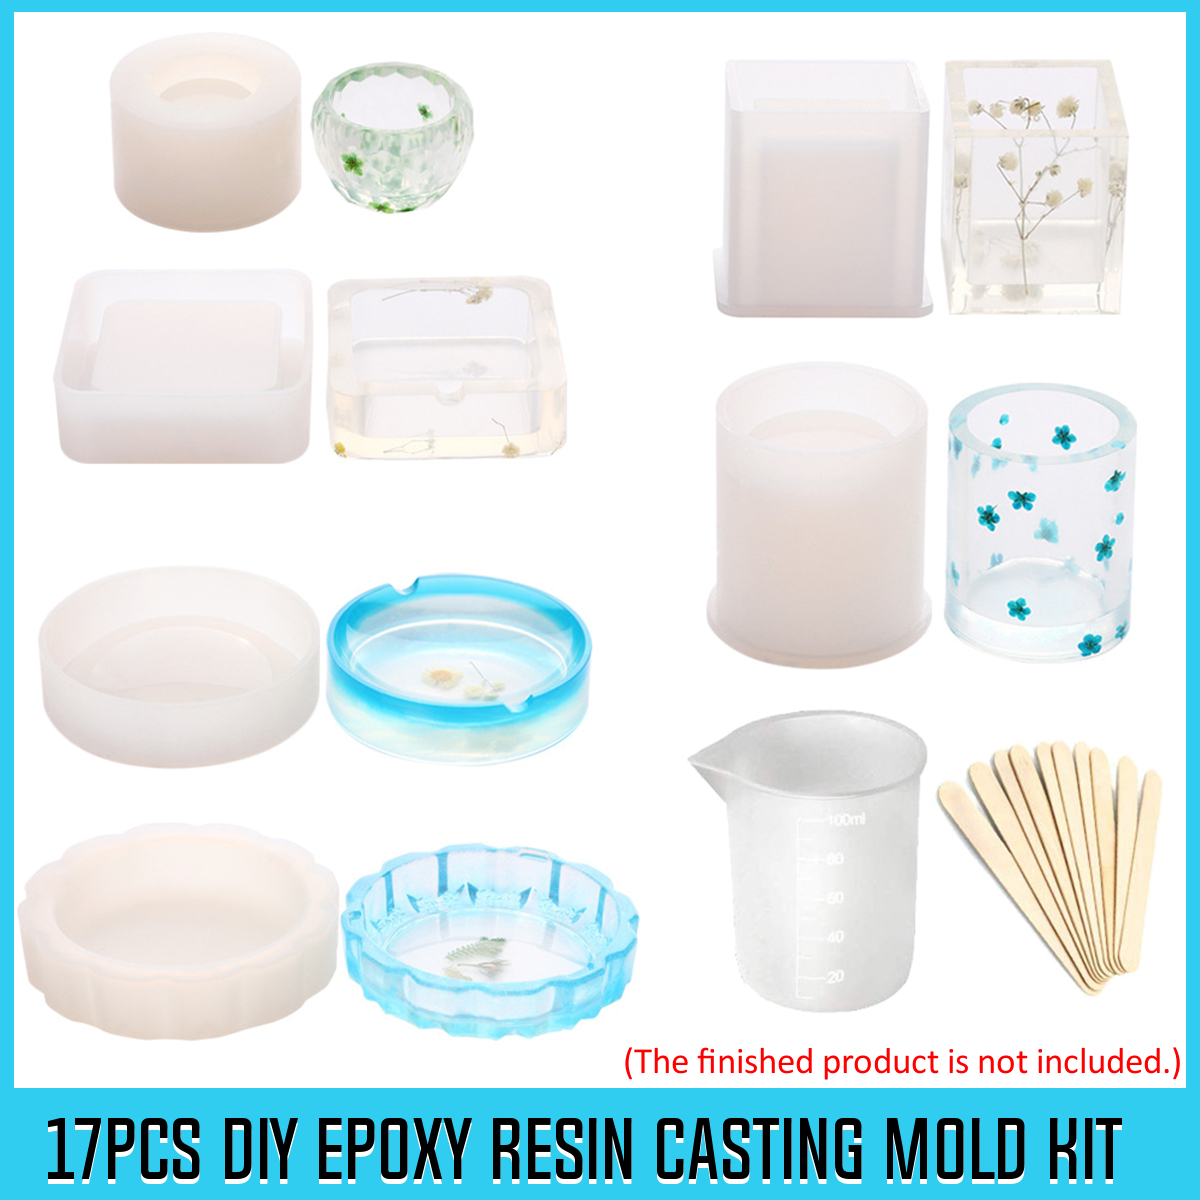 17Pcs-DIY-3D-Geometric-Epoxy-Resin-Casting-Molds-Kit-Silicone-Mould-Jewelry-Pendant-Craft-Making-Too-1651104-2